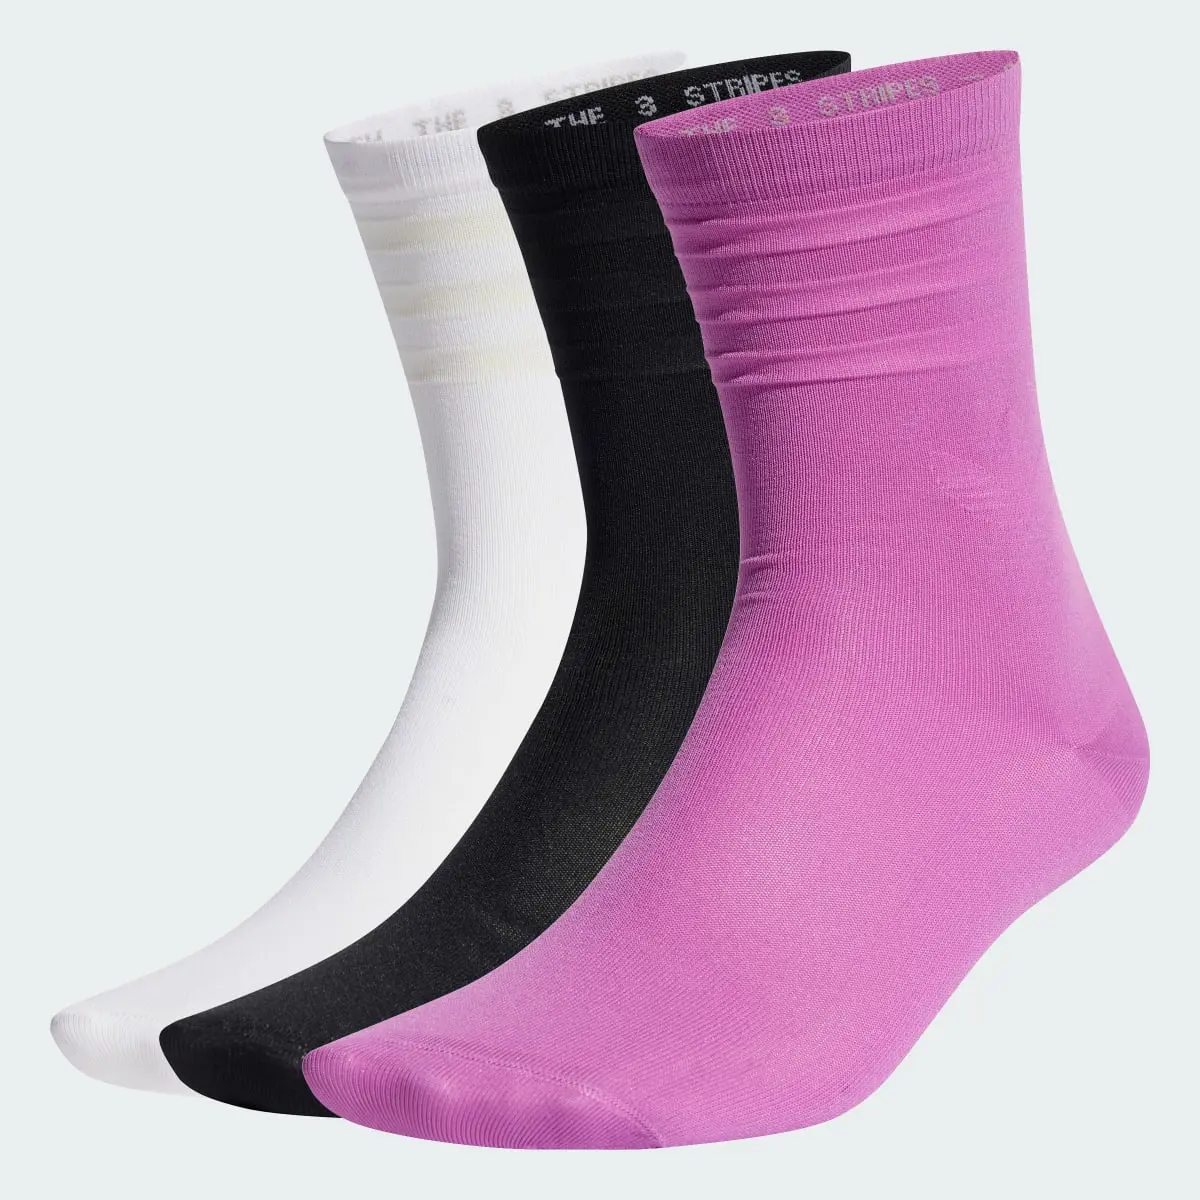 Adidas Chaussettes mi-mollet Collective Power (3 paires). 1